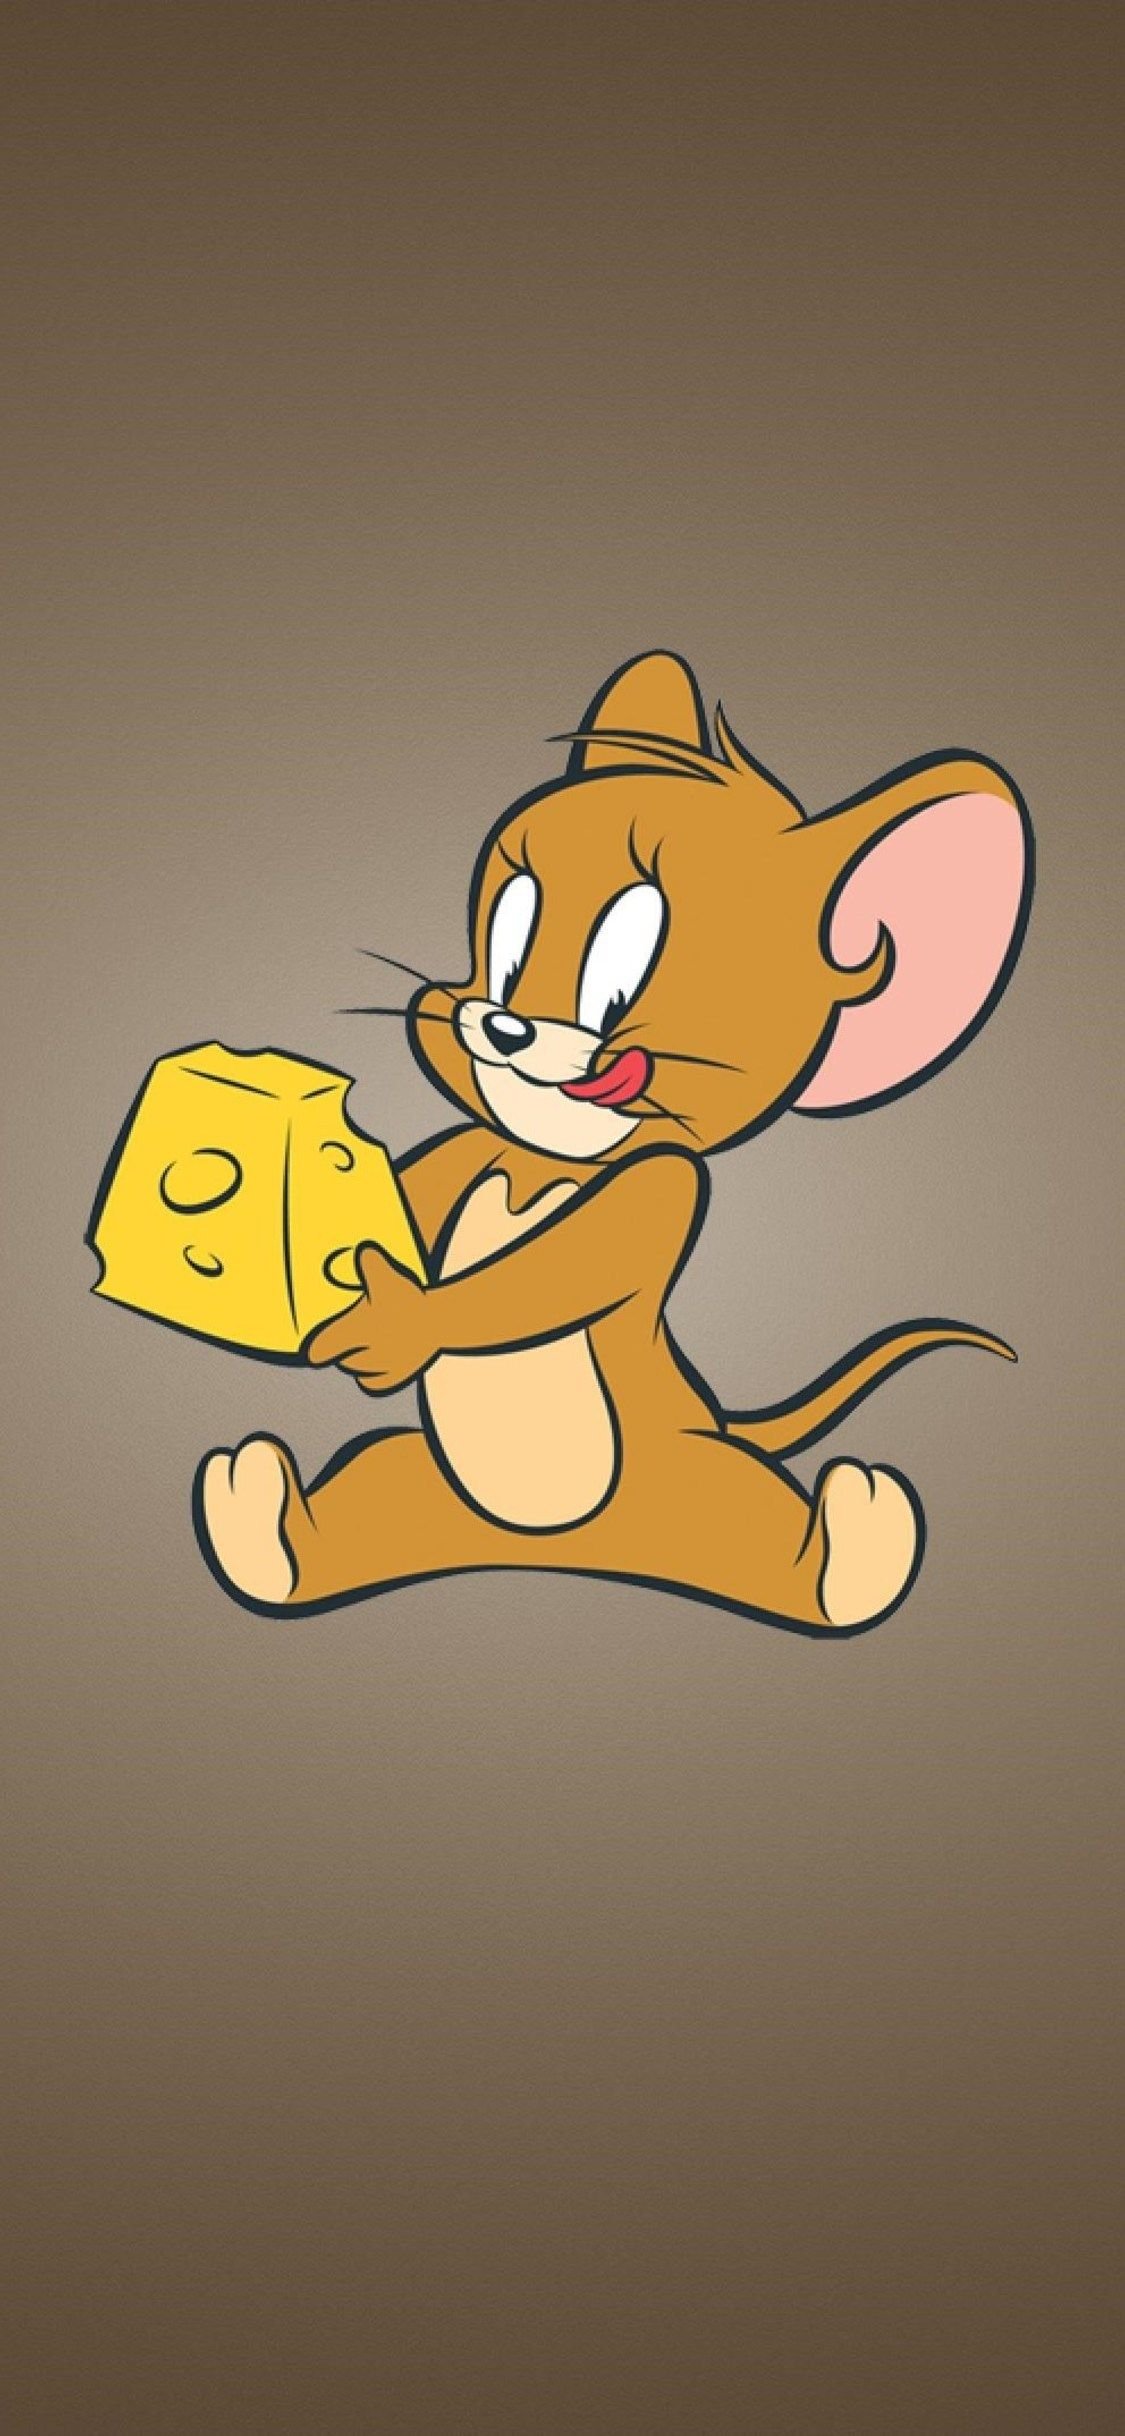 Jerry - cheese